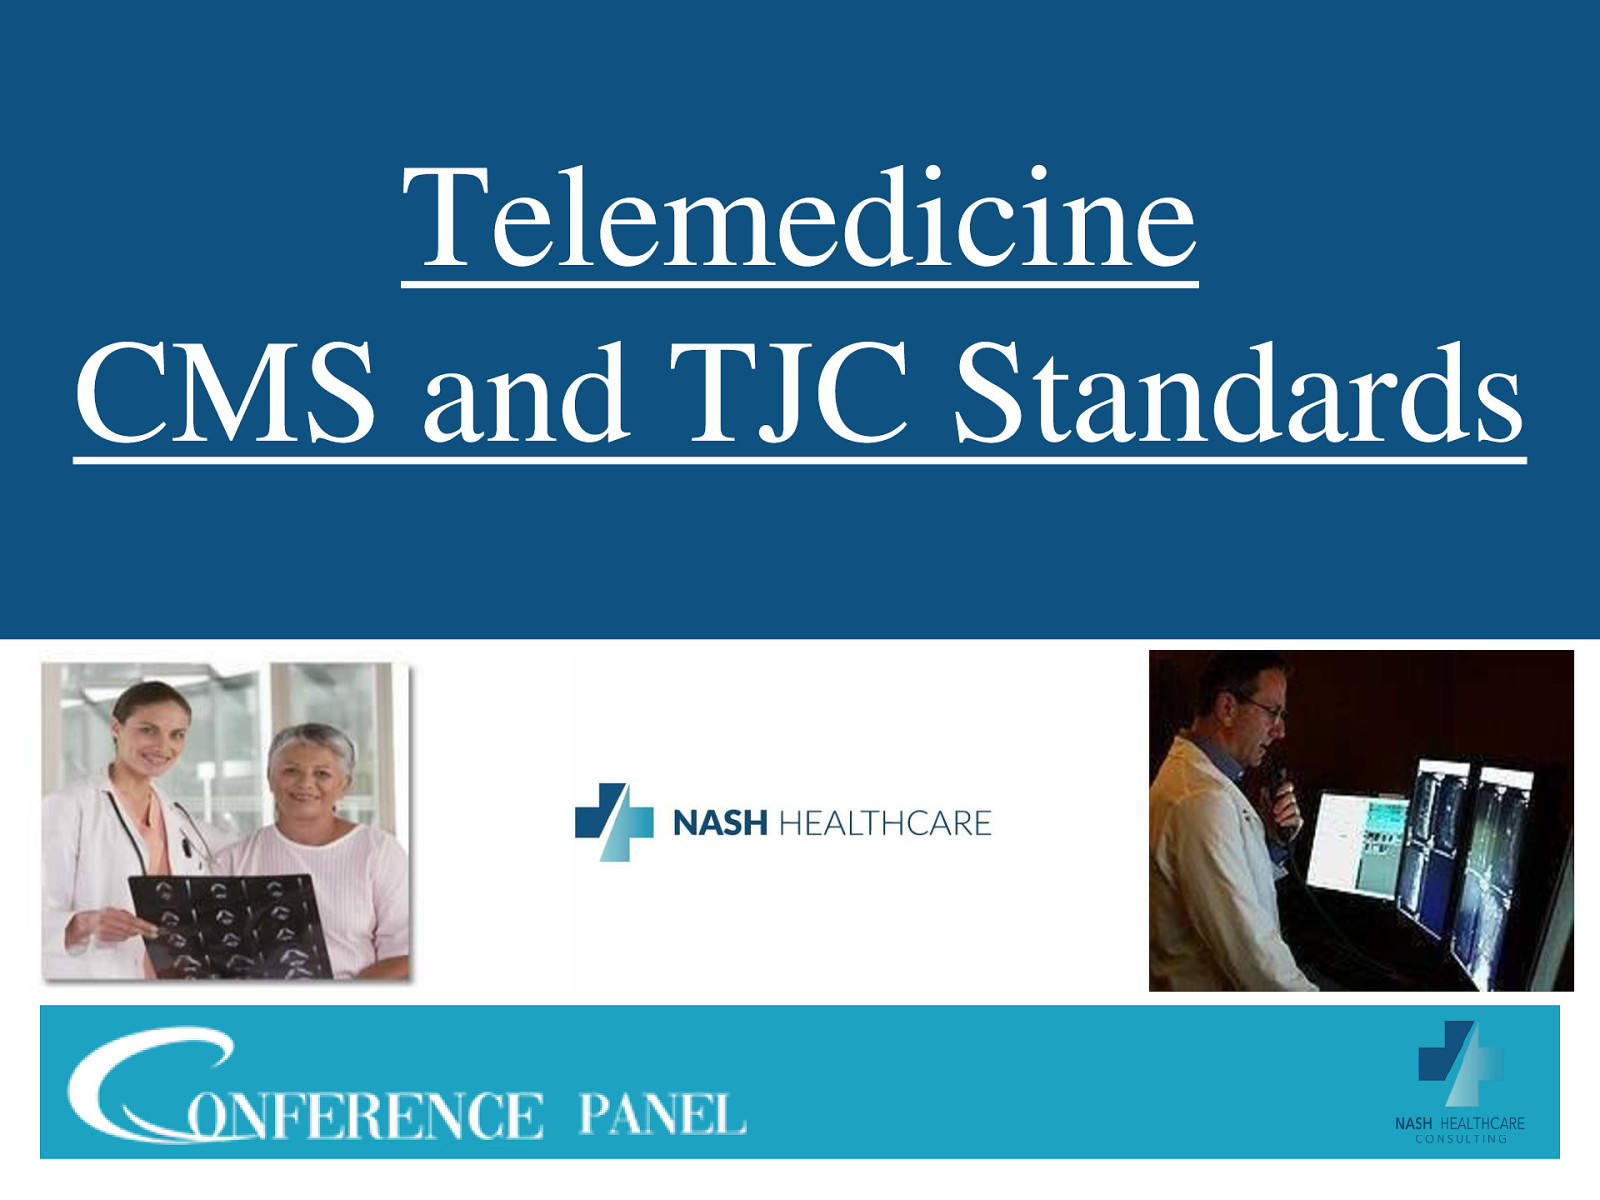 Latest CMS and TJC Standards for Telemedicine